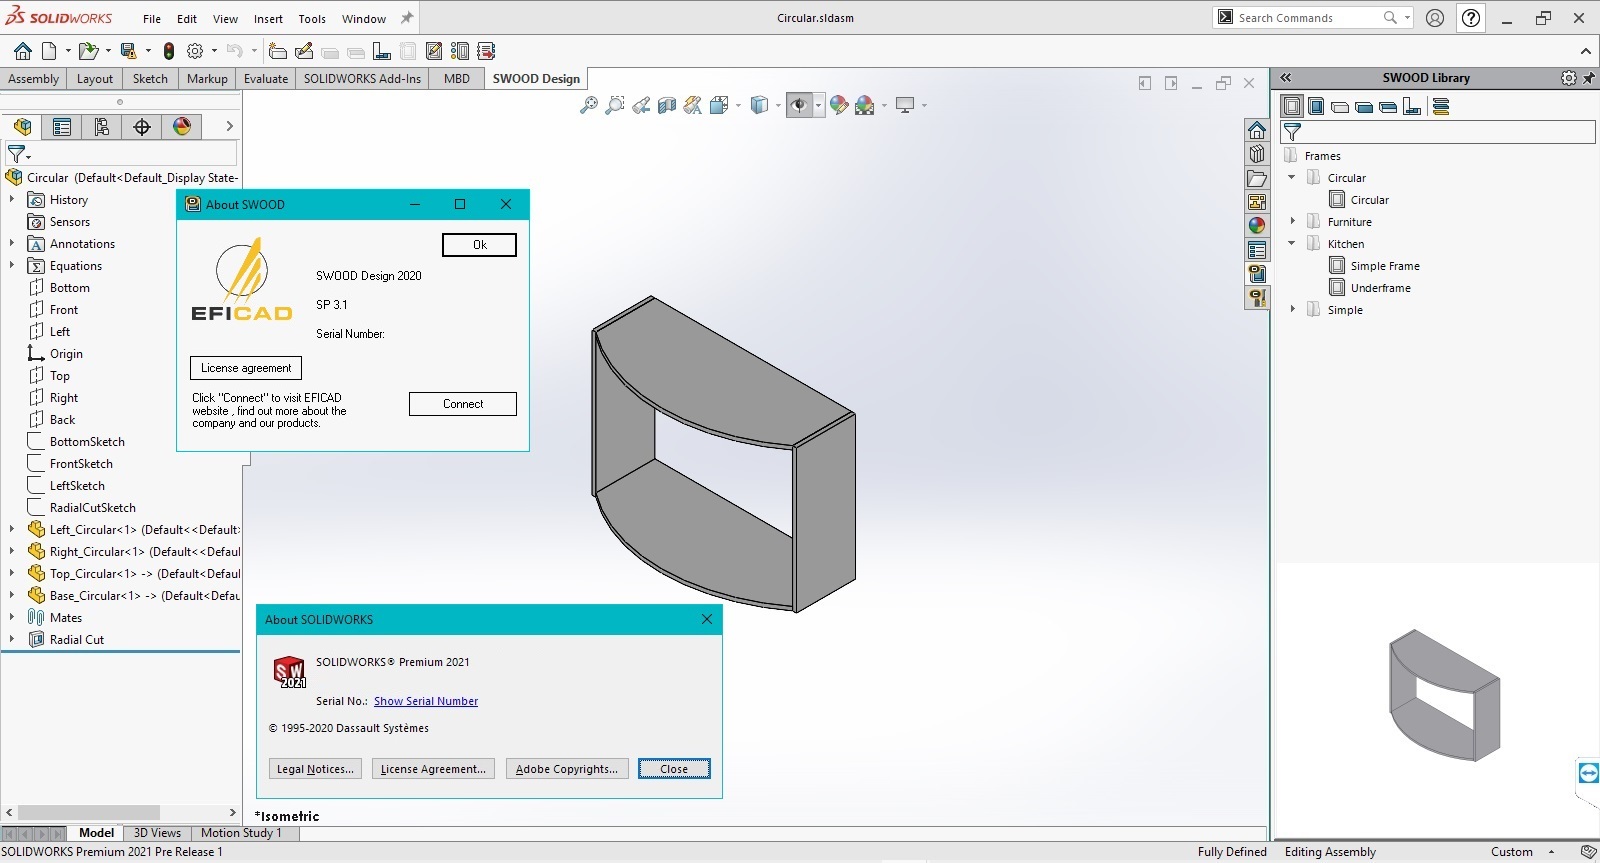 Working with SWOOD Design 2020 SP3.1 for SolidWorks 2021